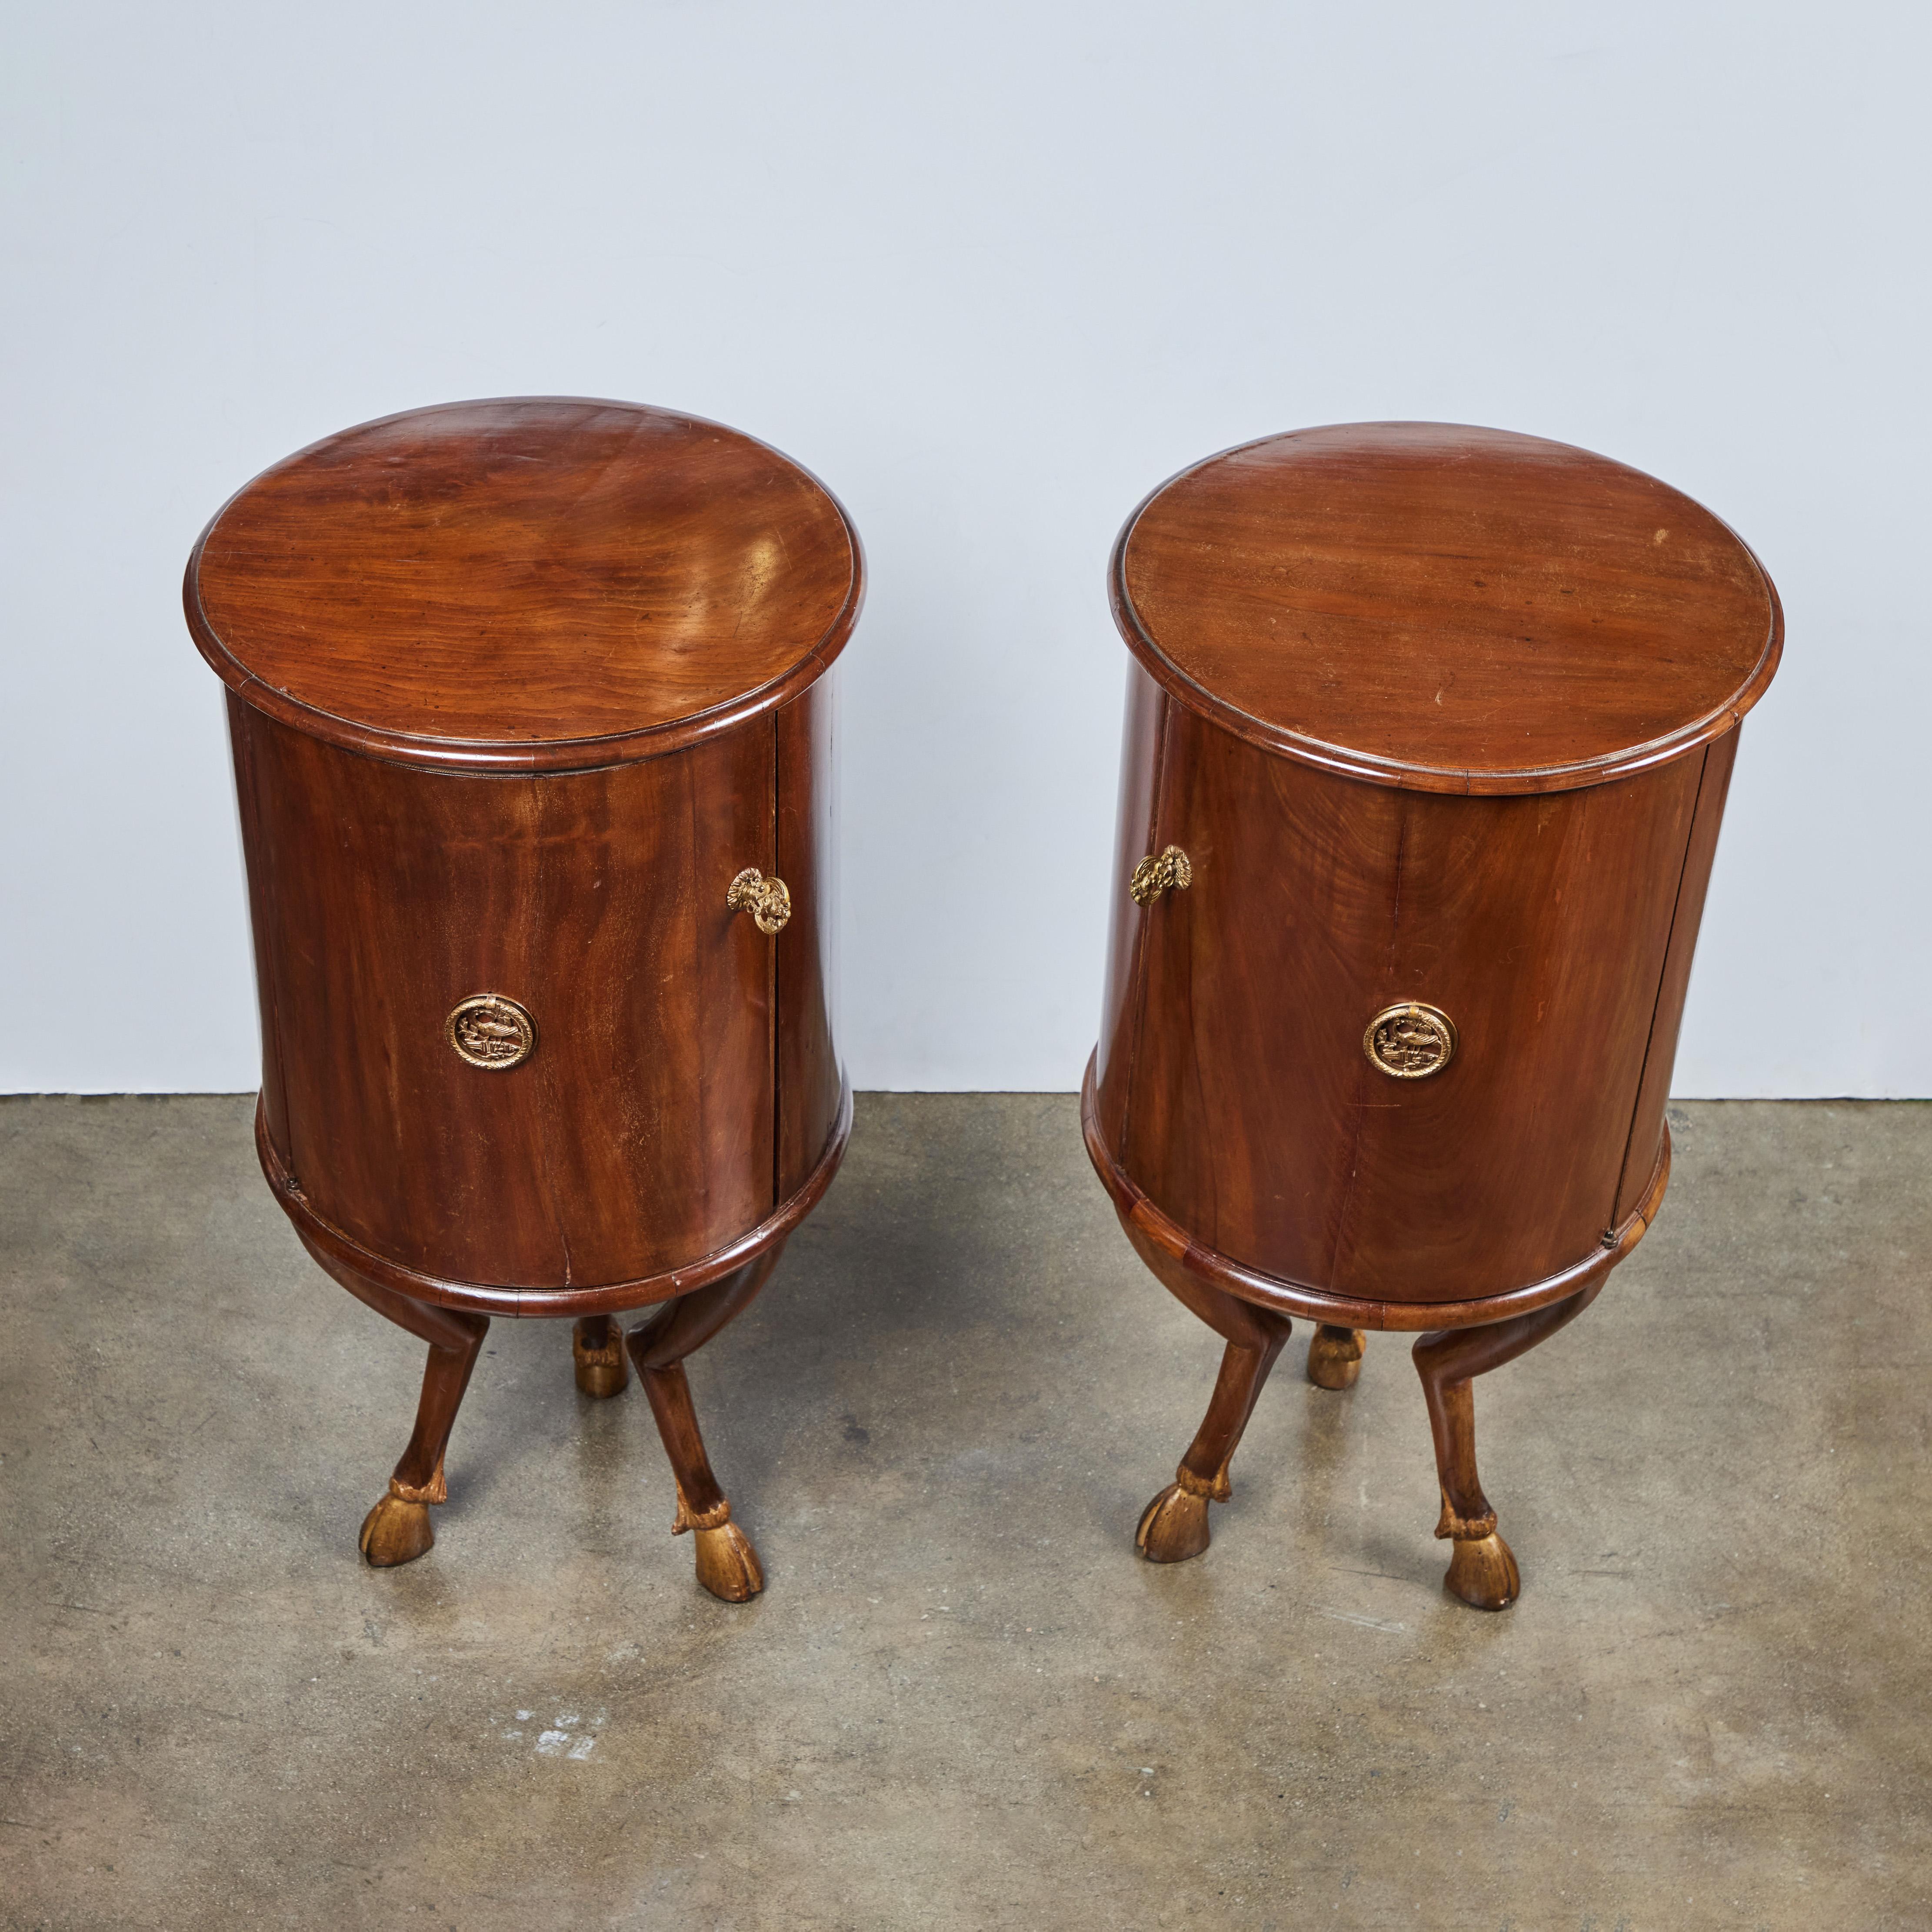 Unique pair of left and right, barrel form, single door, walnut tables, atop a tripod of bent legs terminating in gilt wood, hoof feet. Original, gilt bronze mounts and keys. From Modena, Italy.